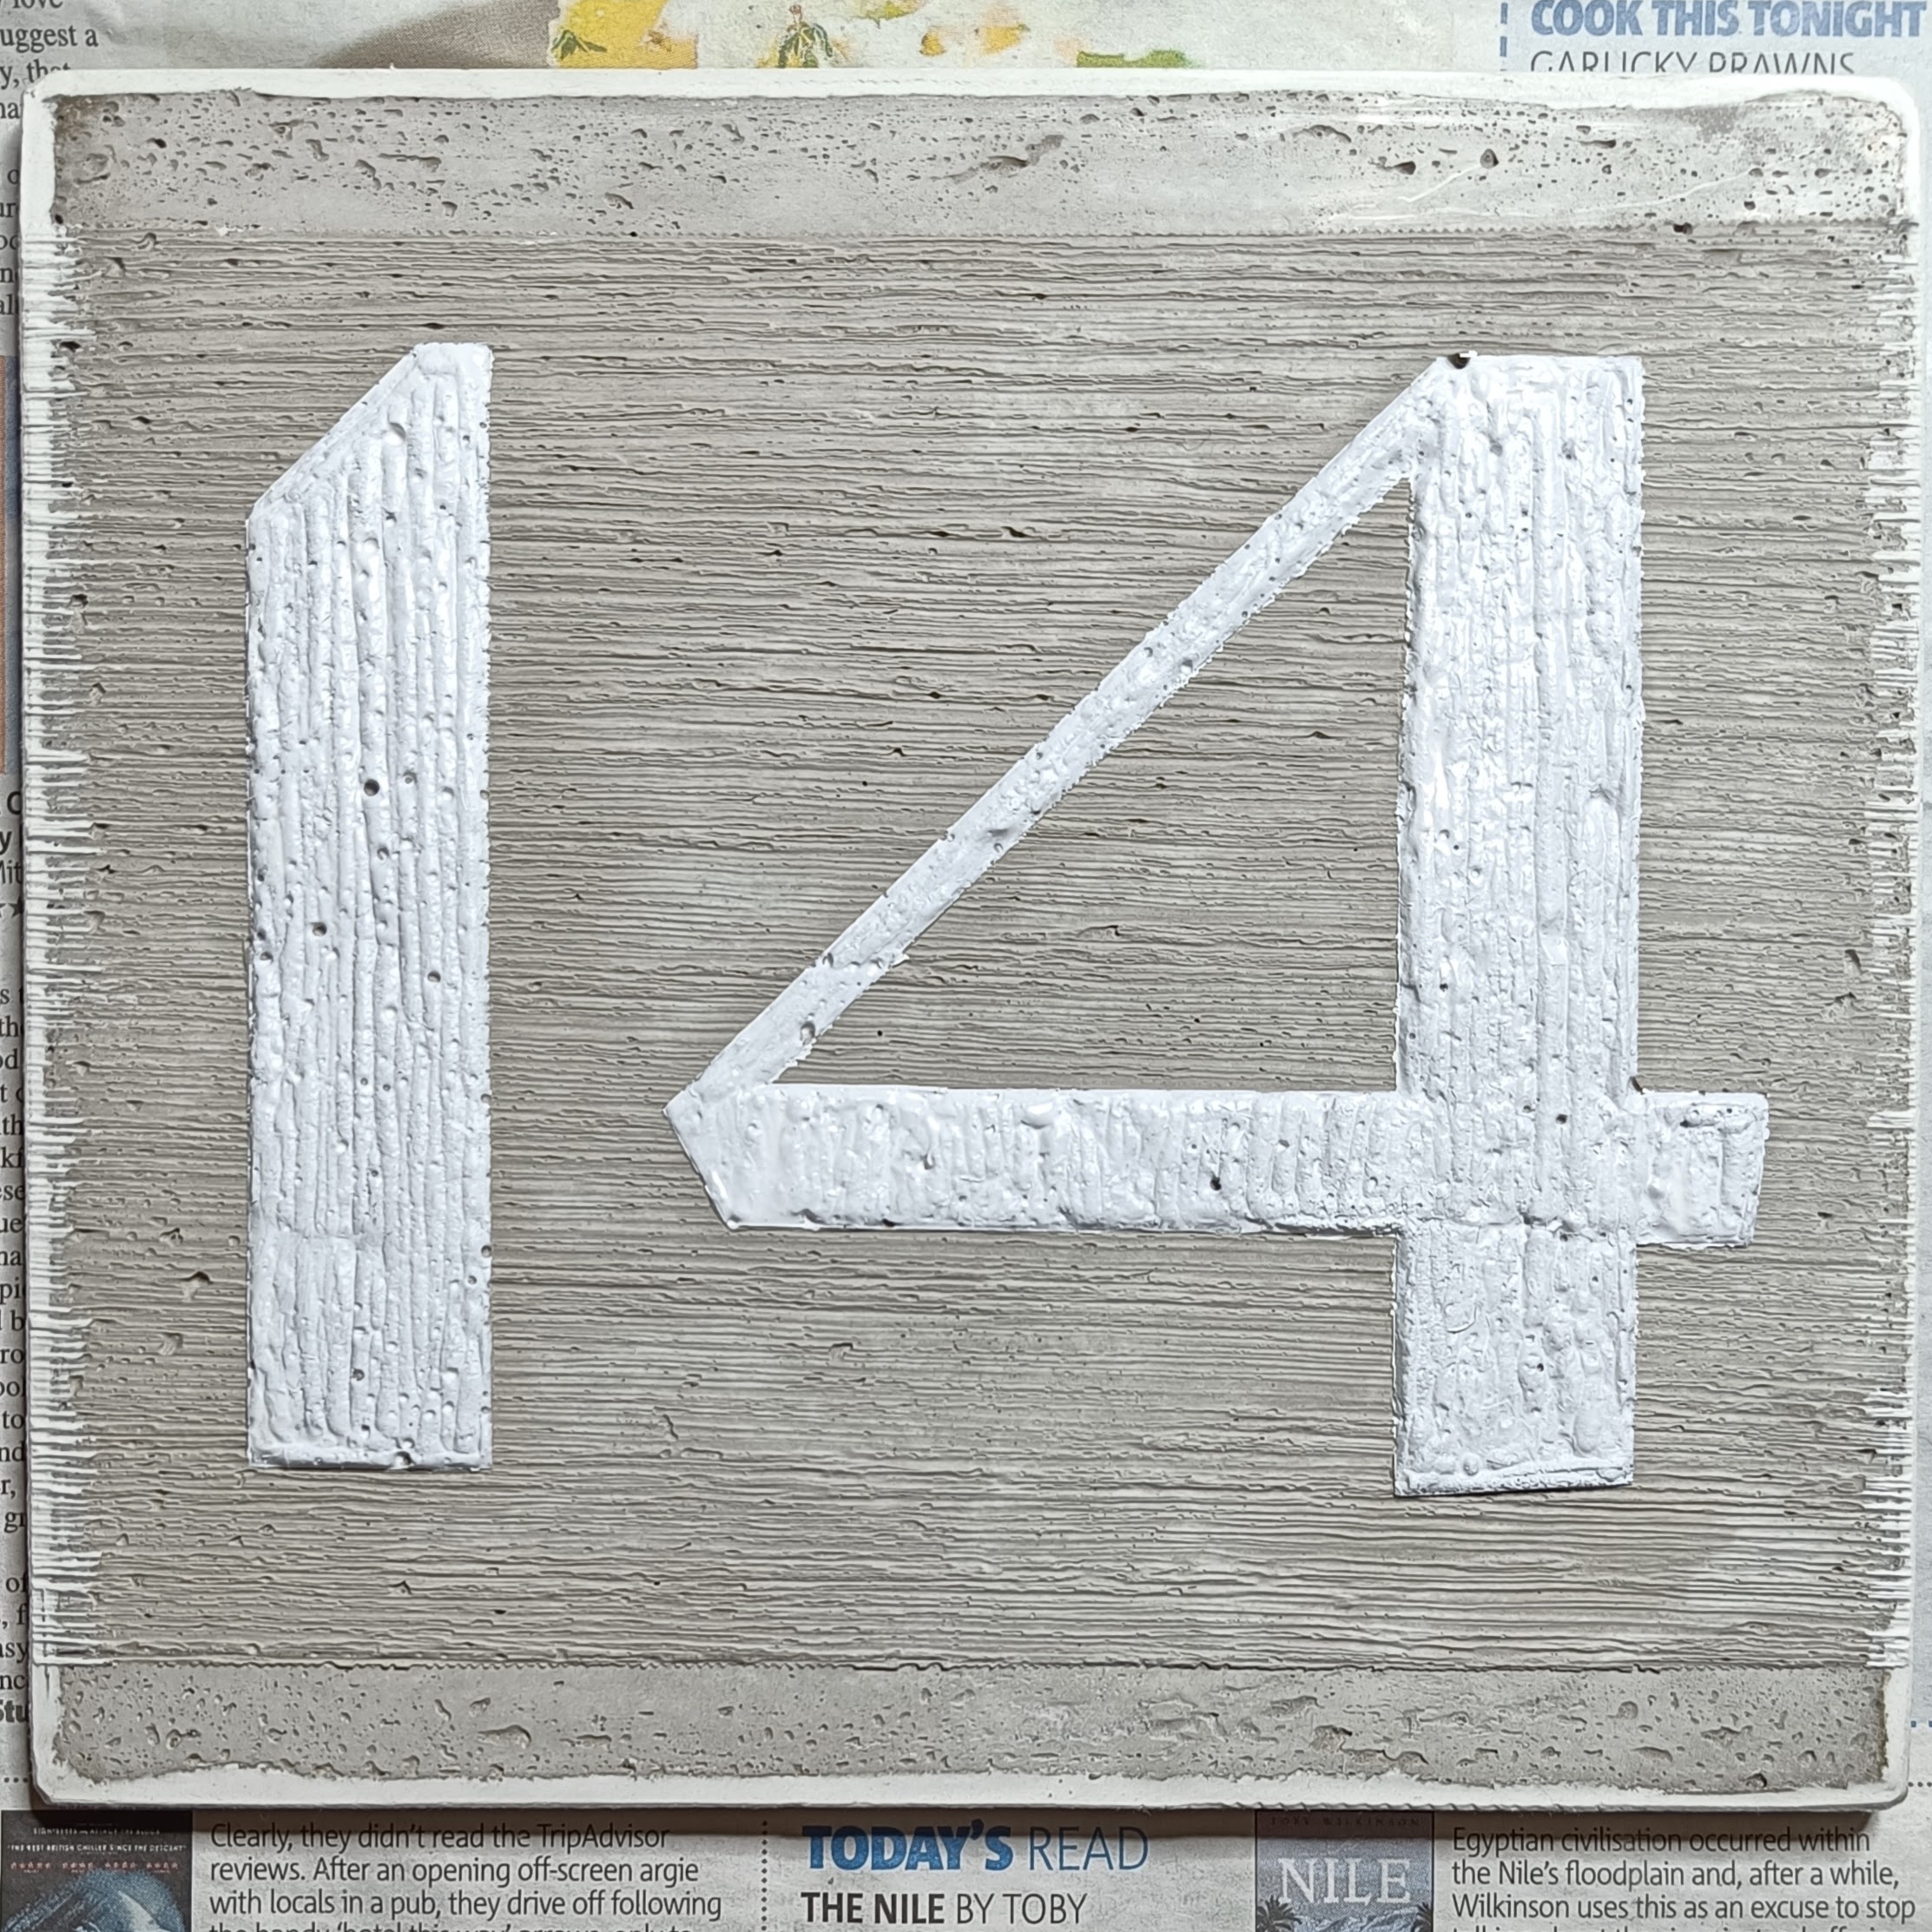 a concrete plaque showing a number 14. The background of
  the plaque is a horizontal woodgrain texture. The number 14
  has been painted white, and is slightly raised up and has a
  contrasting vertical and slightly bubbly texture.